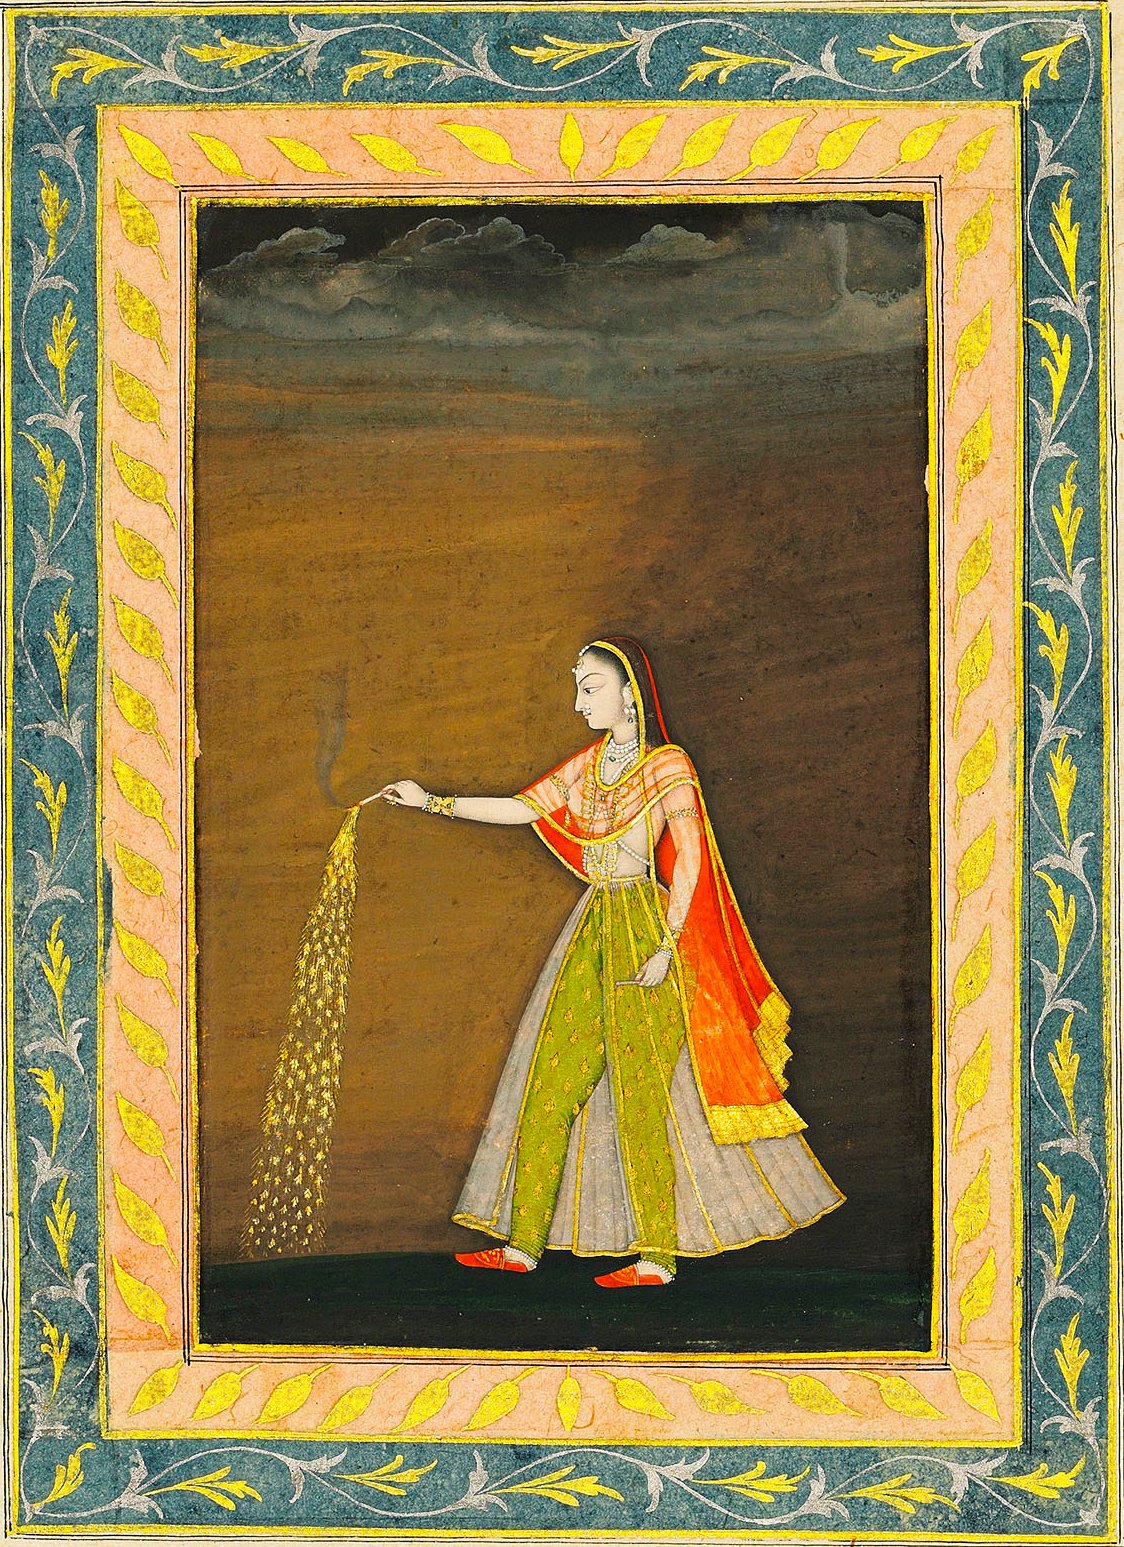 A painting from 1760, depicting a princess from Provincial Mughal India in Lucknow, elegantly holding a candle. She stands against a dark, cloudy backdrop, highlighted by a decorative border with leaf motifs. The princess is dressed in traditional attire with vibrant colors and detailed patterns, conveying her royal status and the artistry of the period. Her posture and the act of holding the candle suggest a ceremonial or symbolic significance.